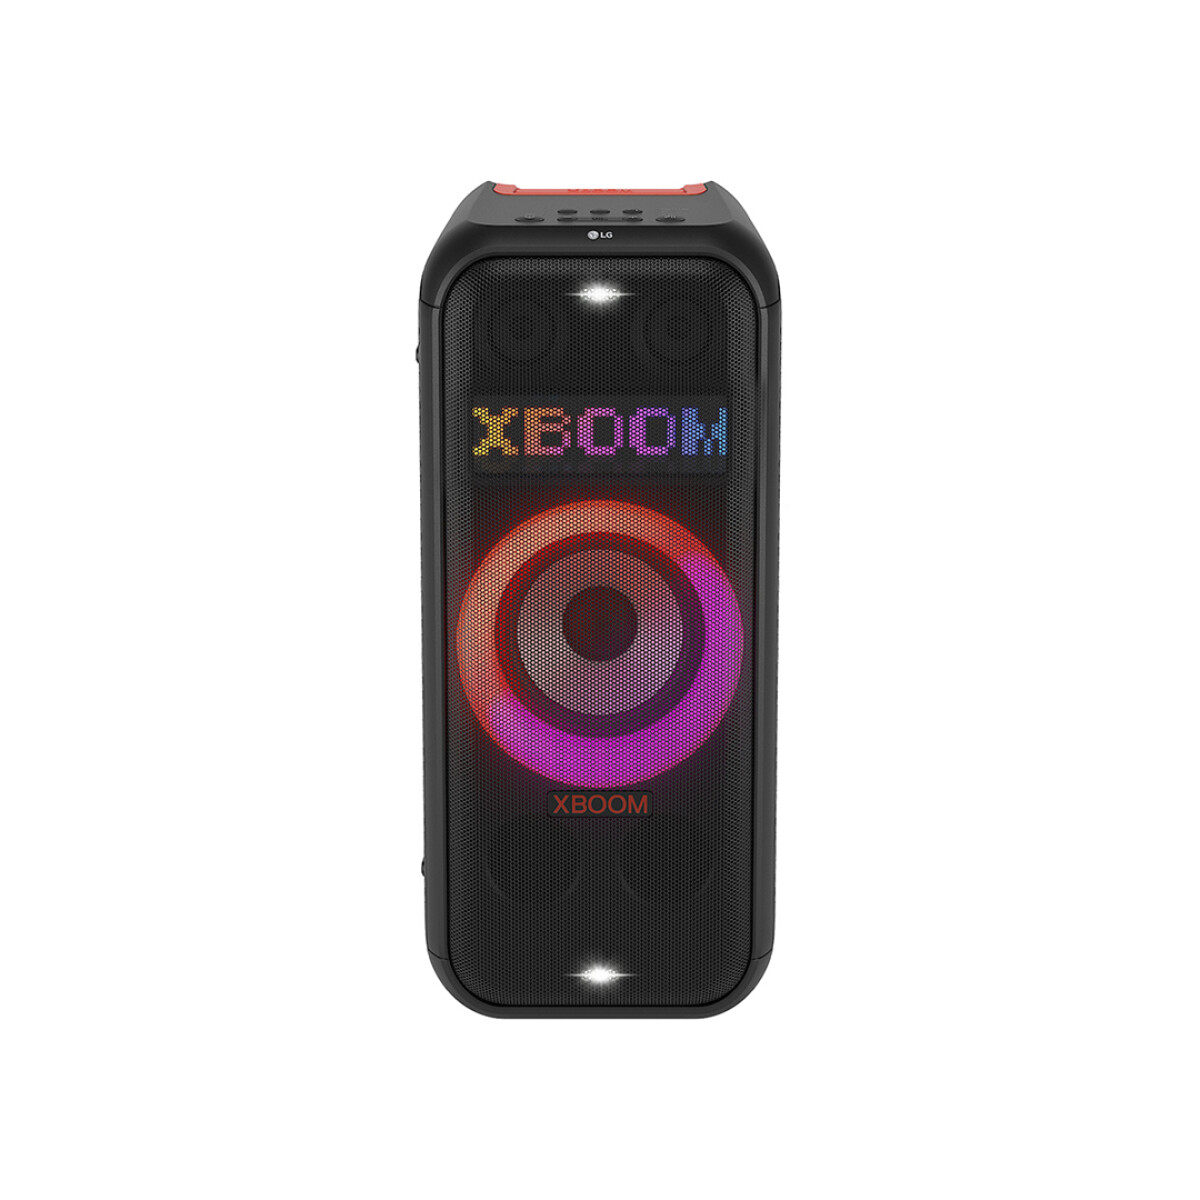 Parlante OneBody LG XBOOM XL7S - 001 